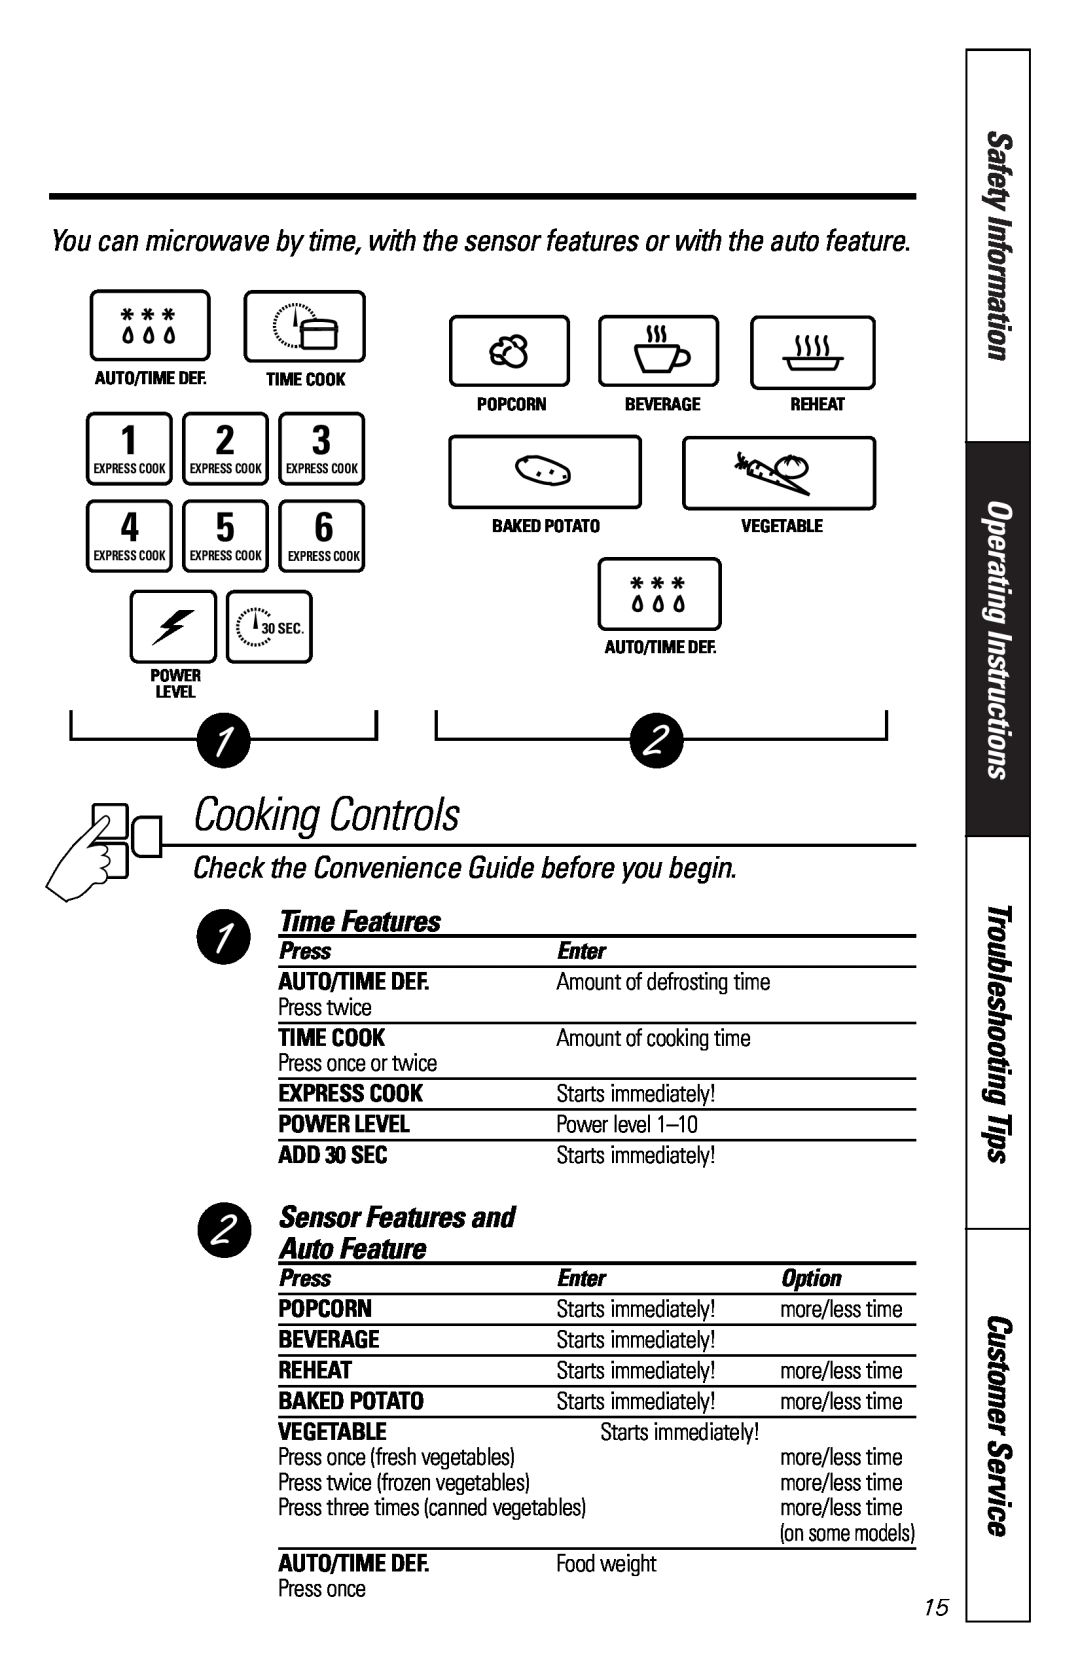 GE JES1851 Cooking Controls, Check the Convenience Guide before you begin, Time Features, Sensor Features and Auto Feature 